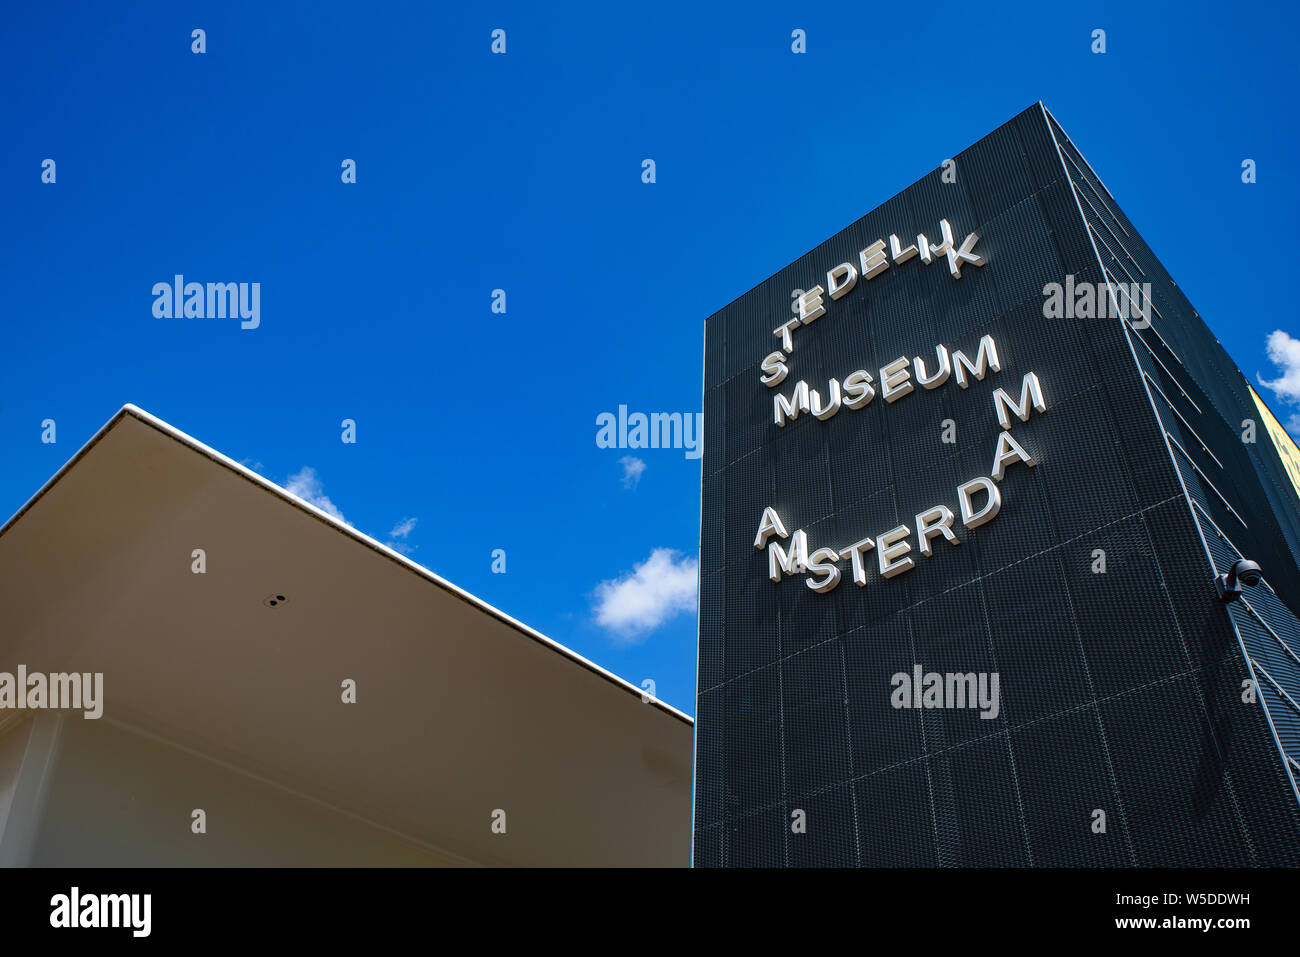 Stedelijk Museum, a museum for modern art and contemporary art in Amsterdam, Netherlands Stock Photo